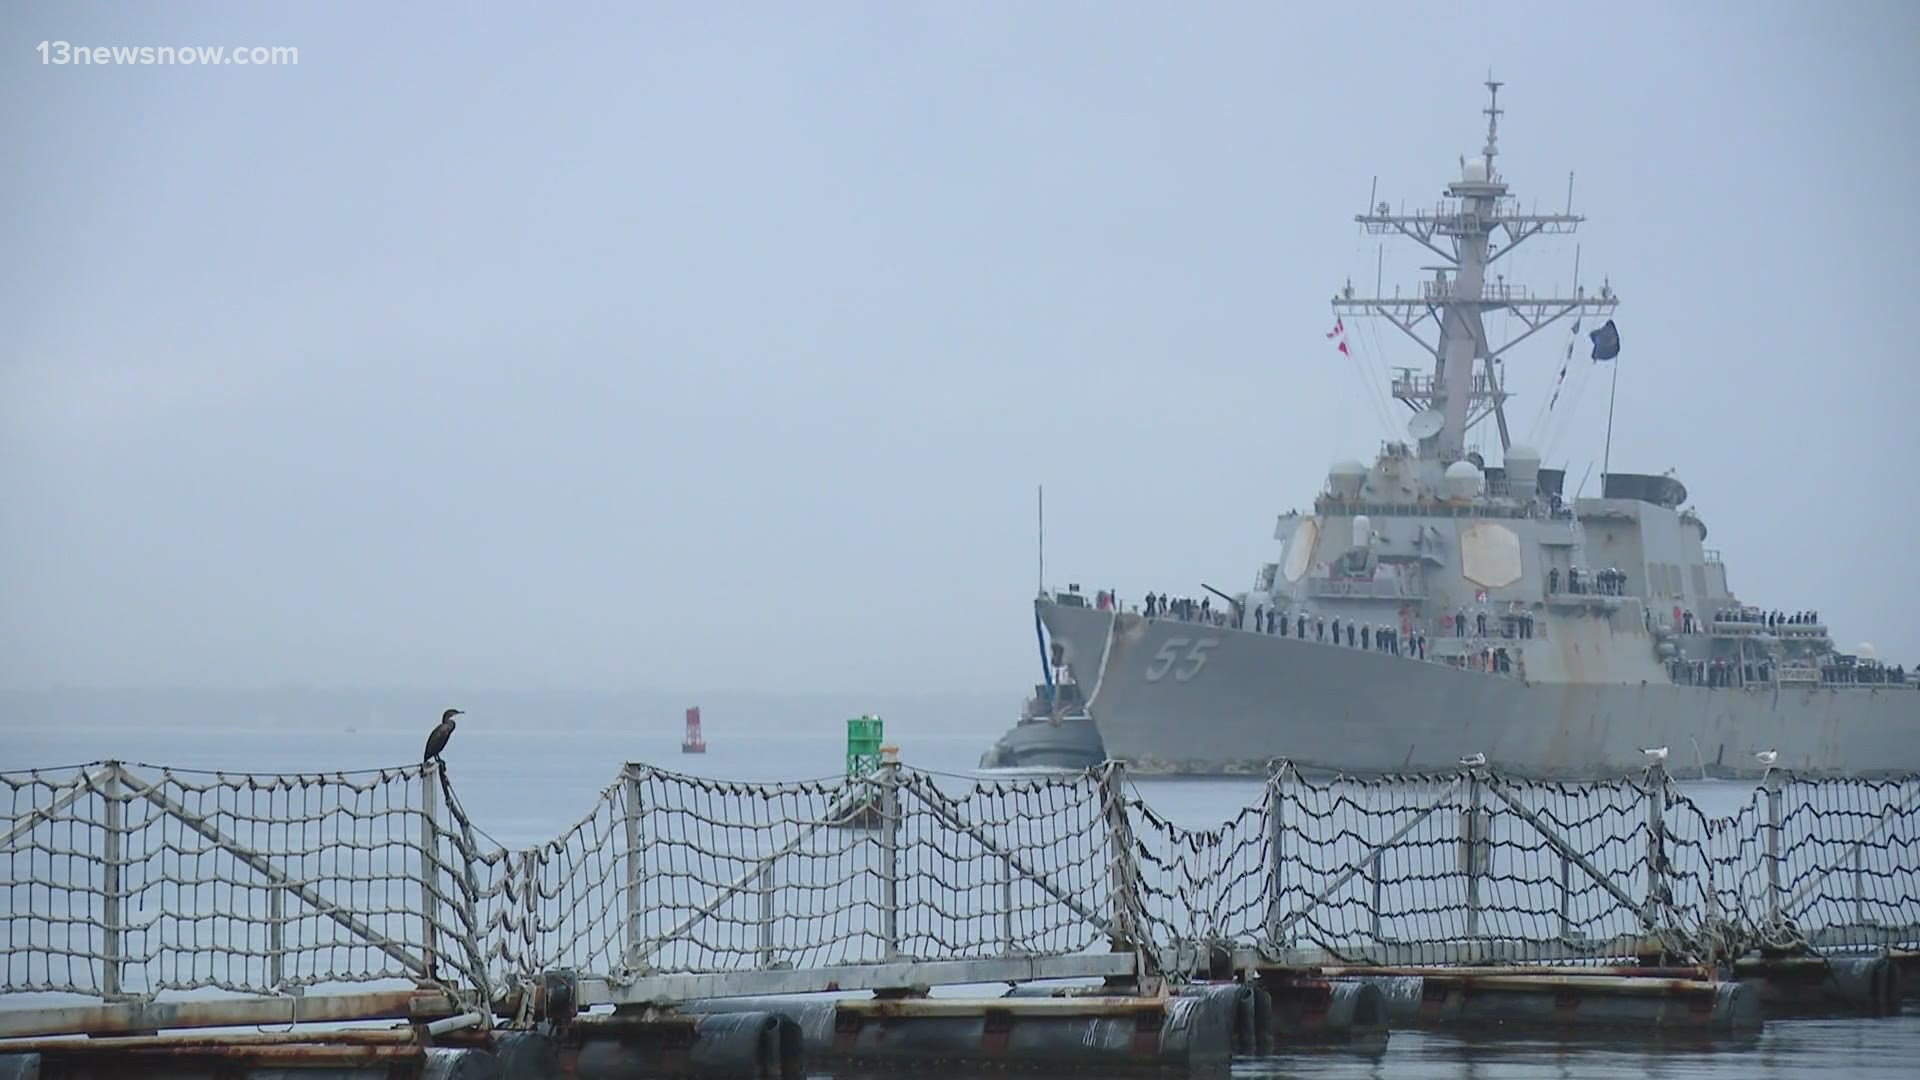 A record-long deployment of more than 200 days came to an end Monday, with the USS Stout (DDG-55) and crew returning home